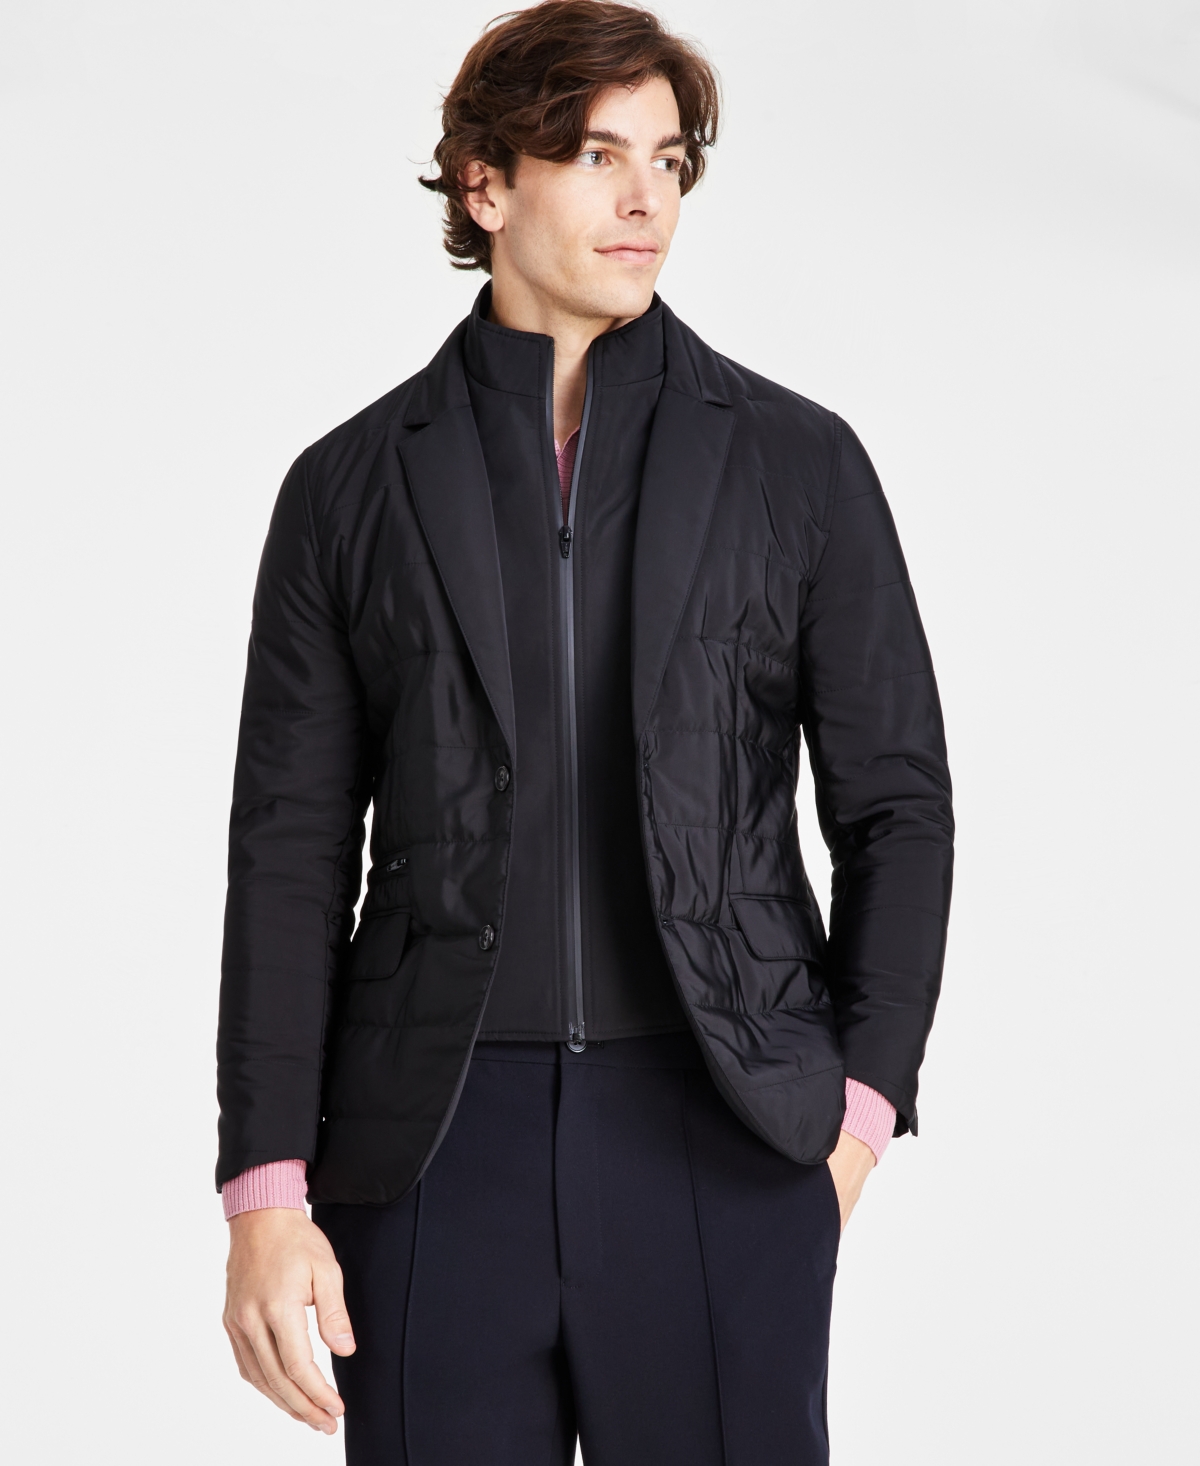 Men's Regular-Fit Quilted Blazer with Removable Full-Zip Bib, Created for Macy's - Deep Black